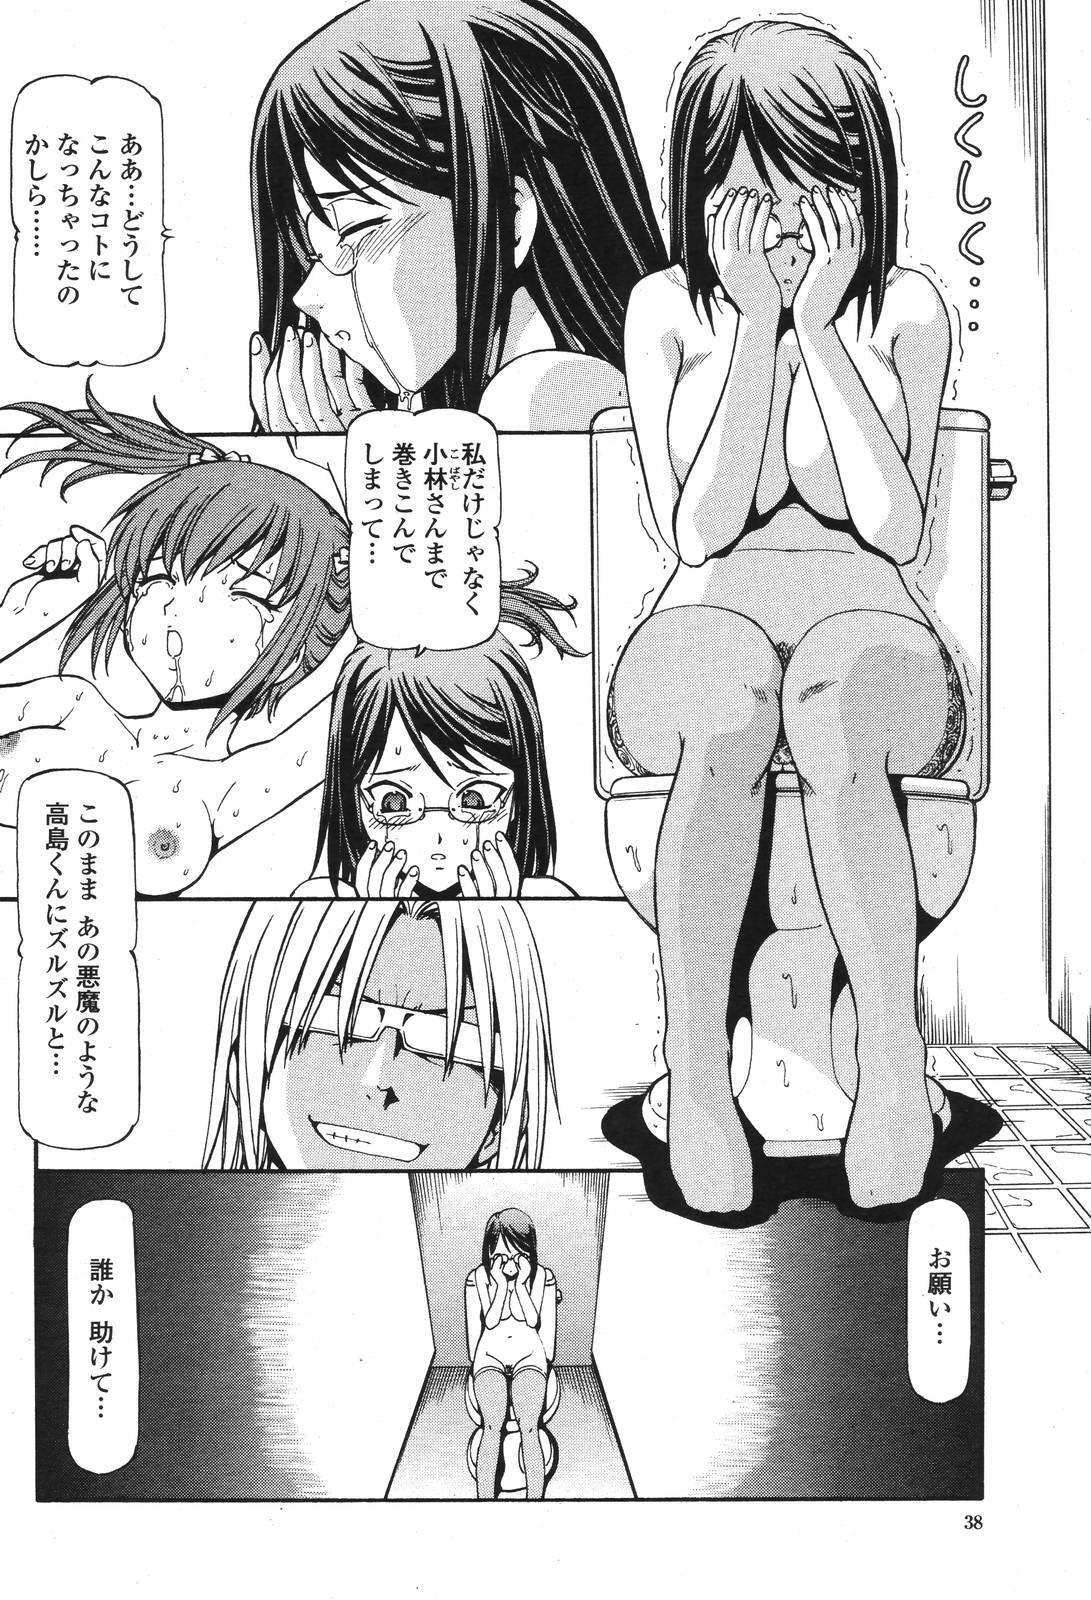 COMIC Momohime 2006-10 page 40 full